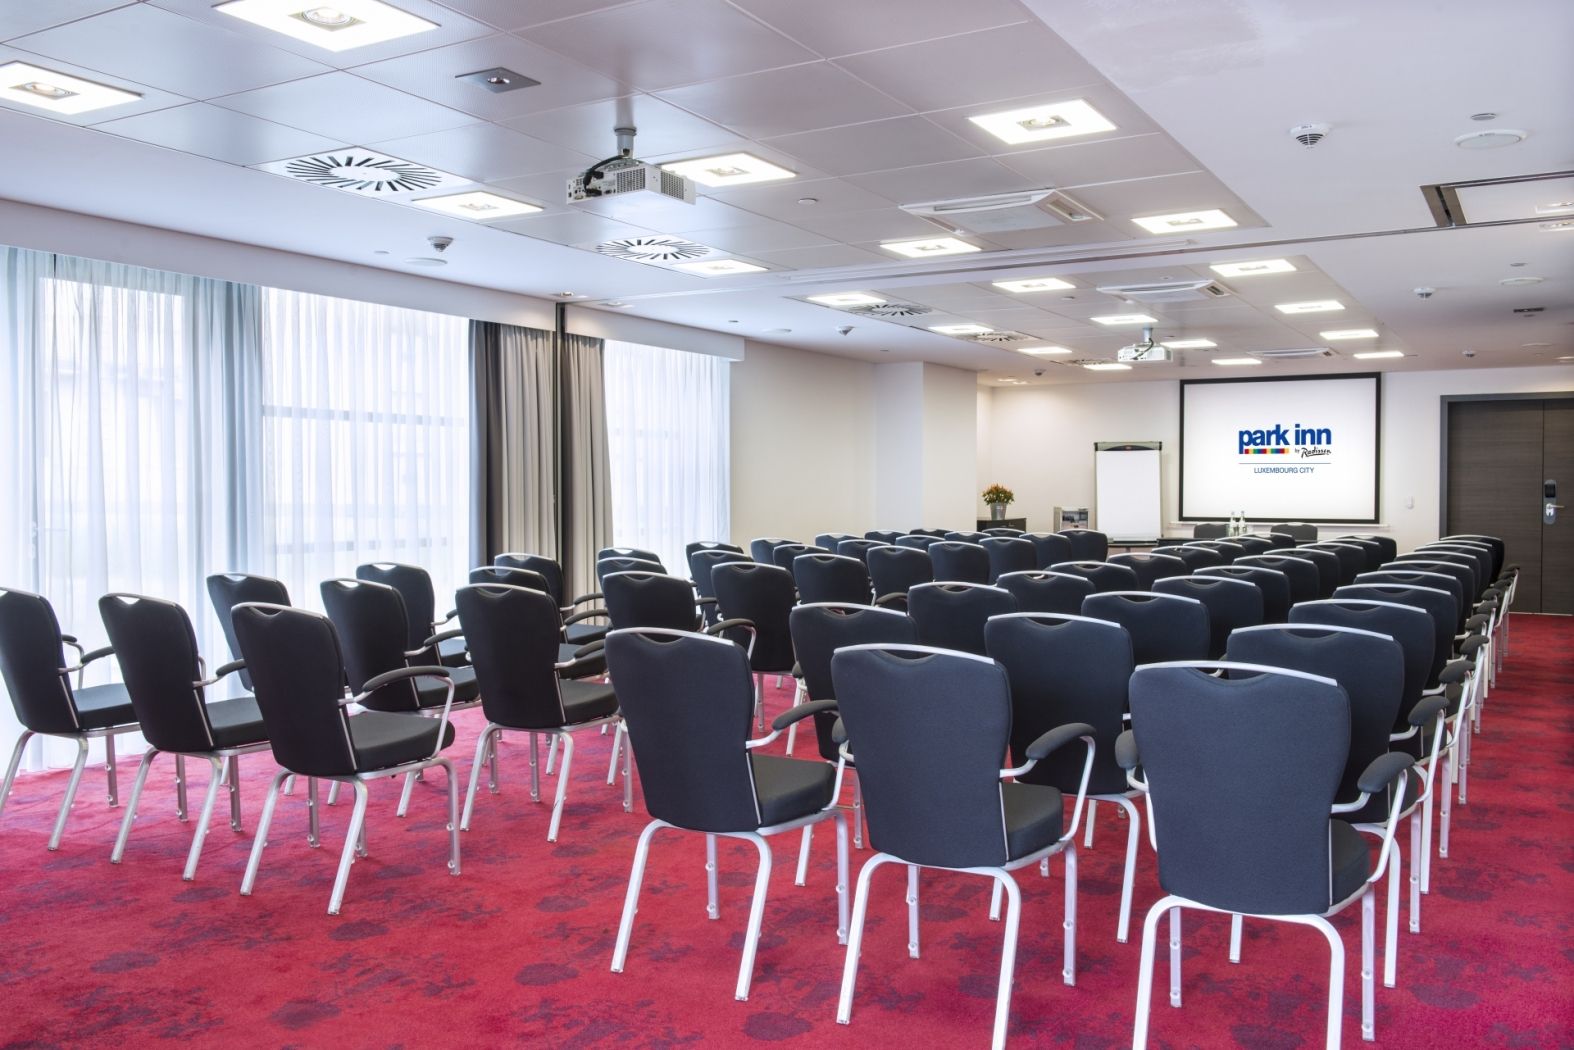 Park Inn by Radisson Luxembourg City Meetings